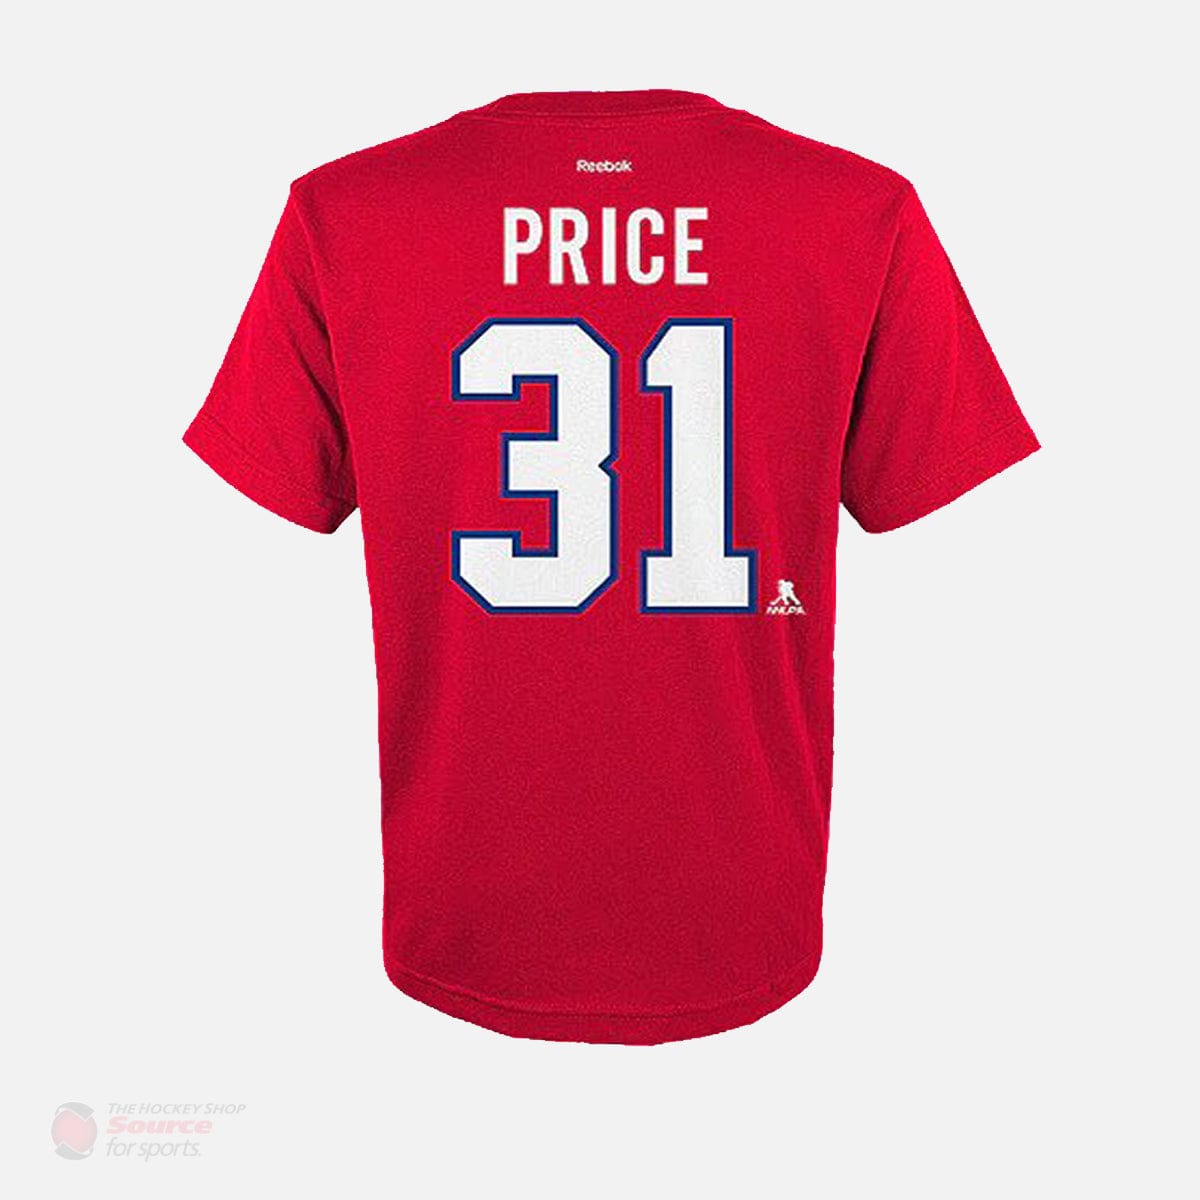 Montreal Canadiens Outer Stuff Name & Number Youth Shirt - Carey Price